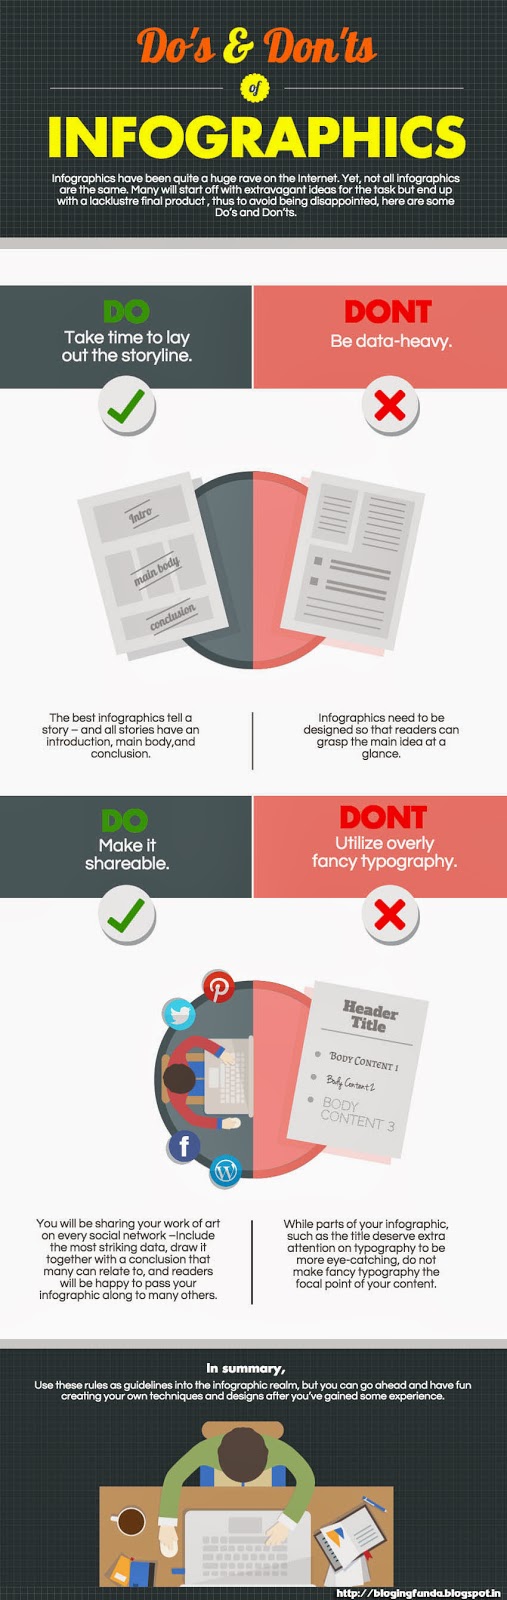 Do's and don'ts of Infographics by Blogging Funda